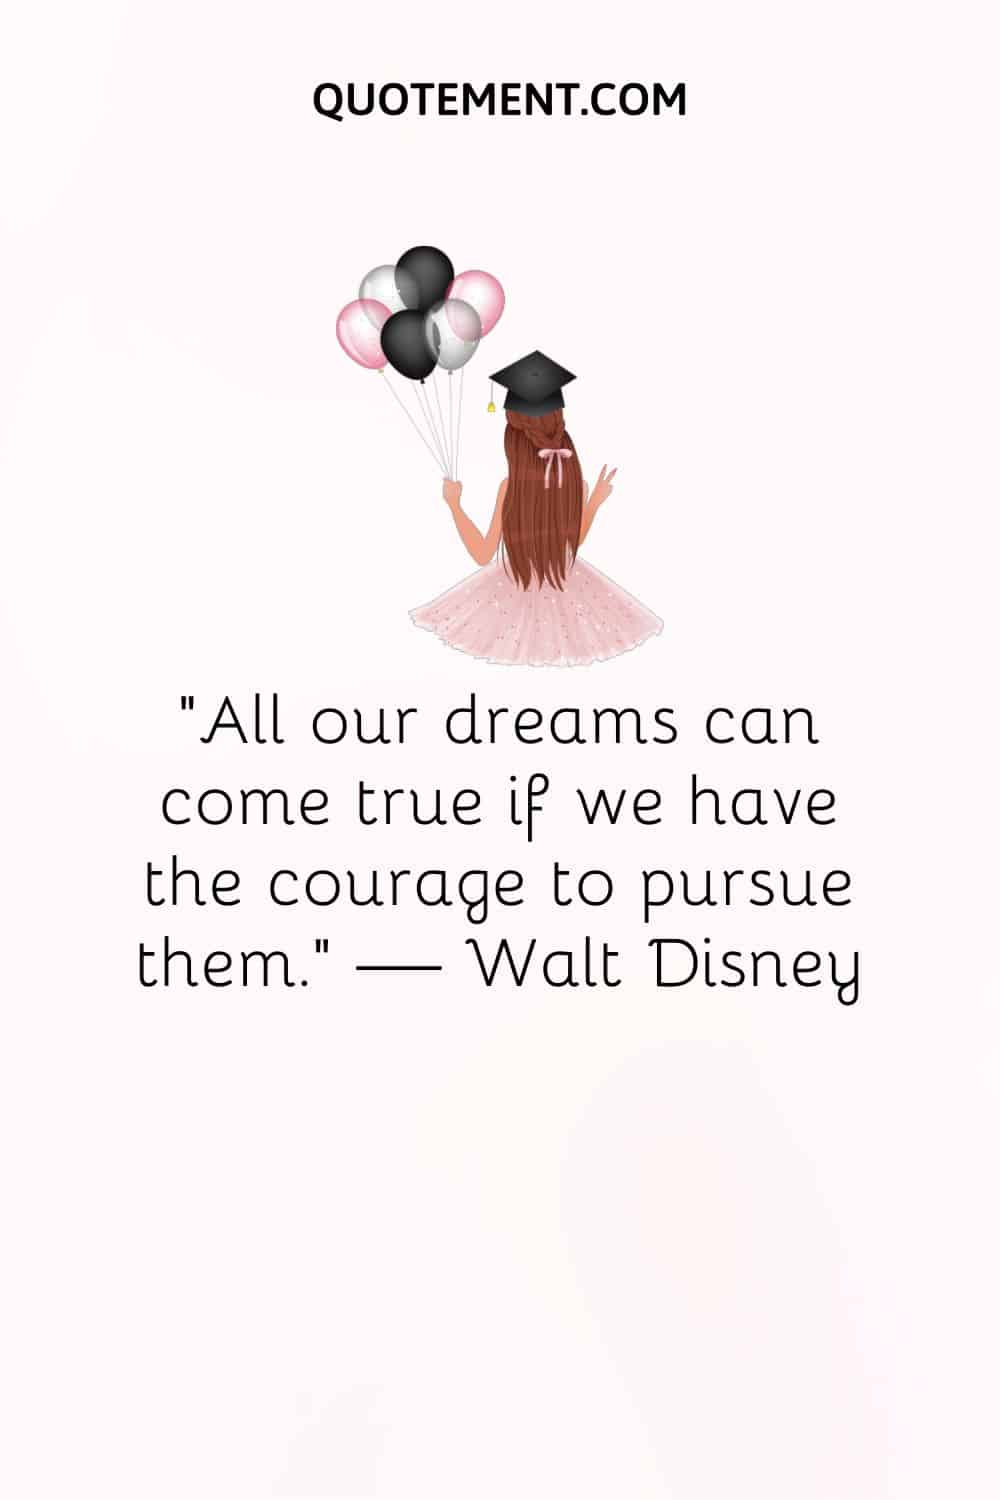 “All our dreams can come true if we have the courage to pursue them.” — Walt Disney